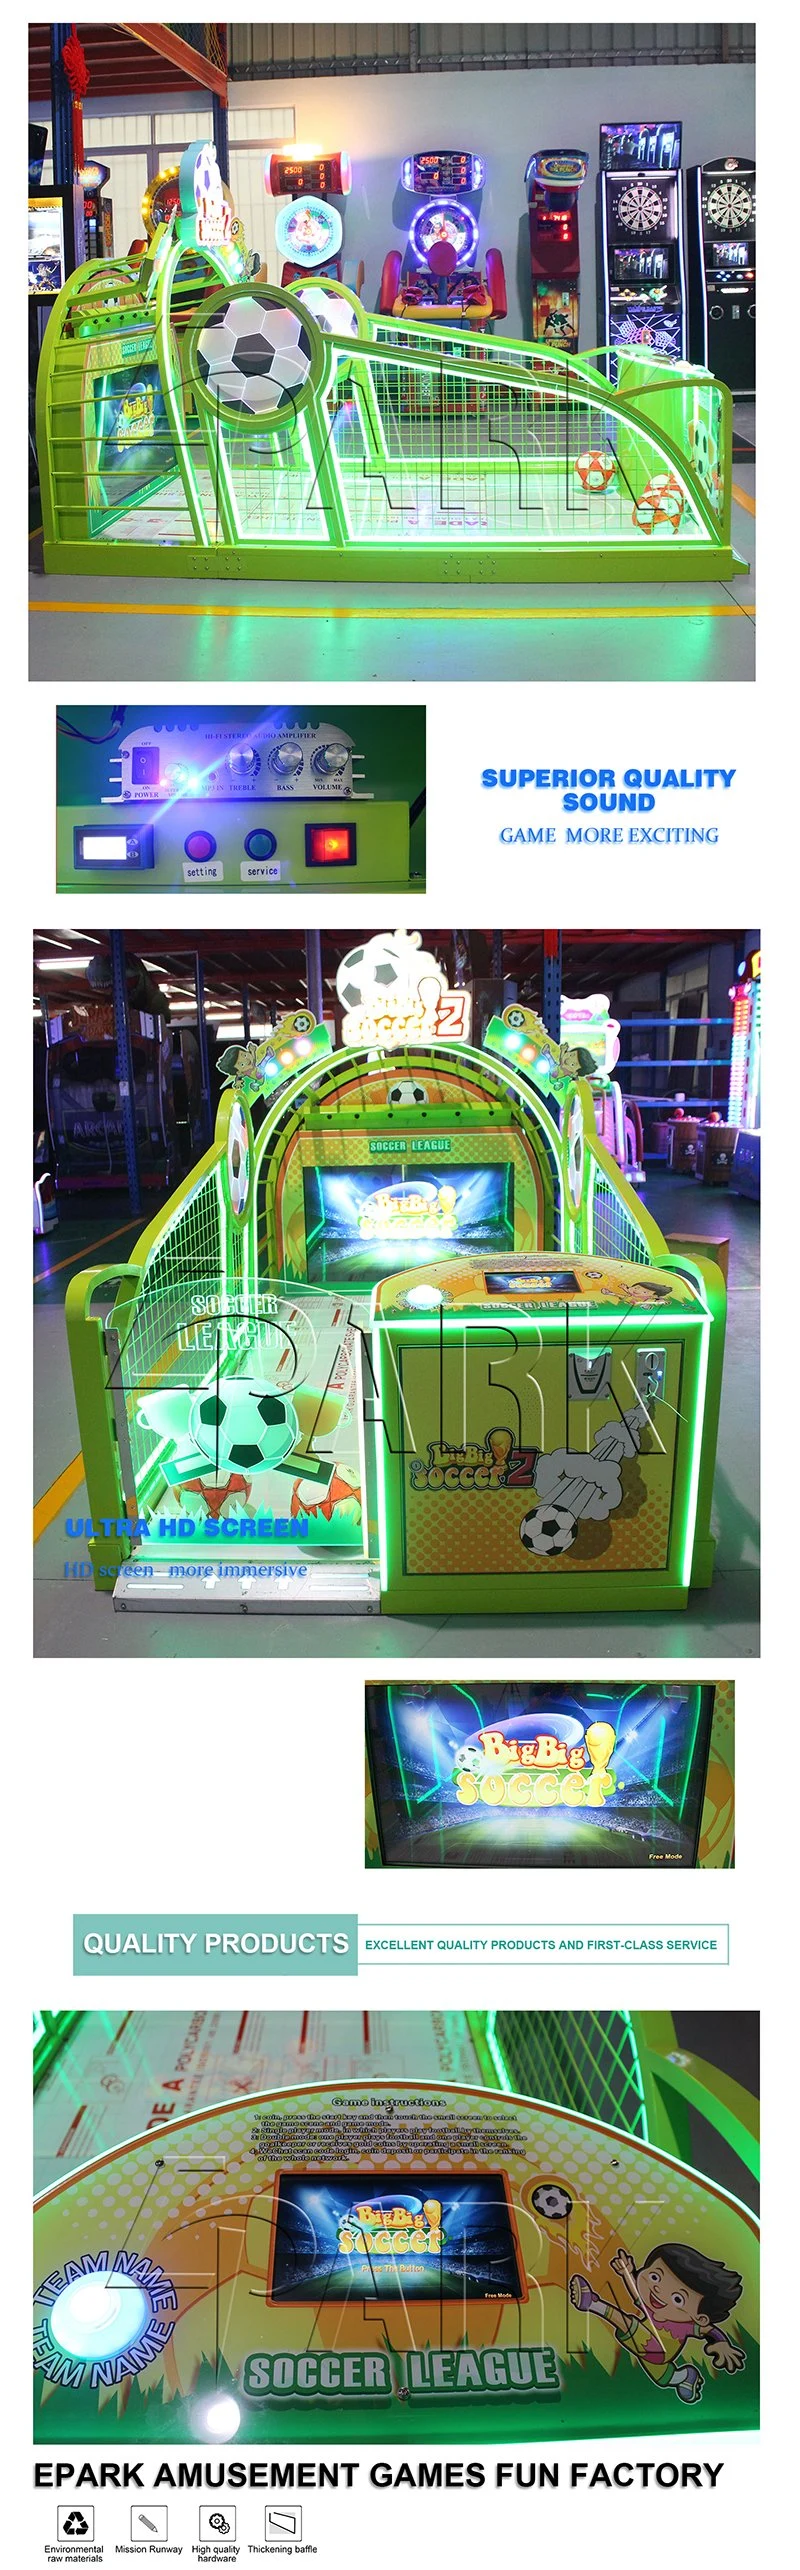 Funny Soccer Games Electronic Football Throwing Video Arcade Game Machine